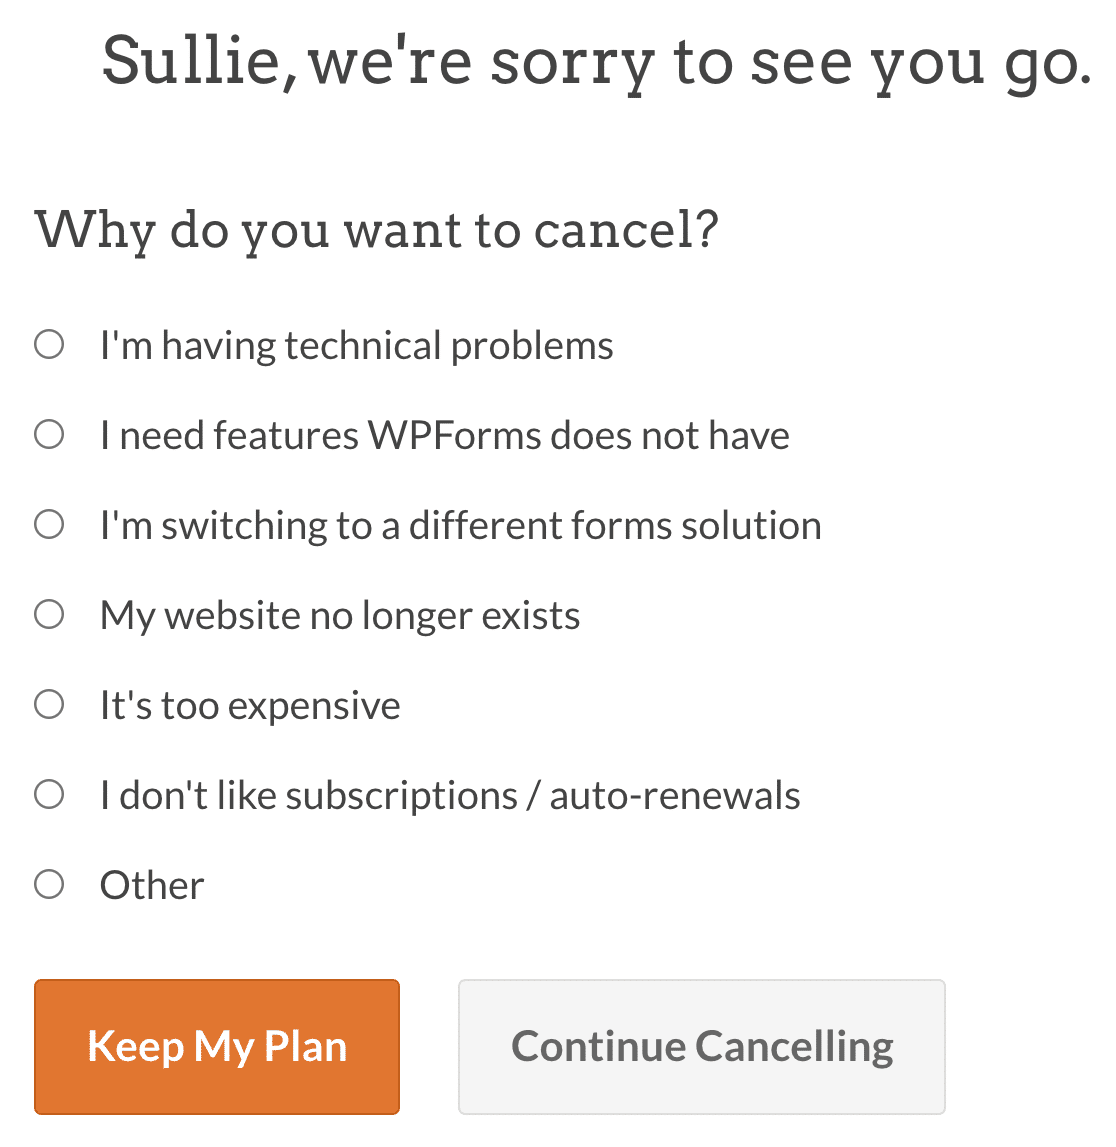 Choosing a reason for canceling your WPForms license